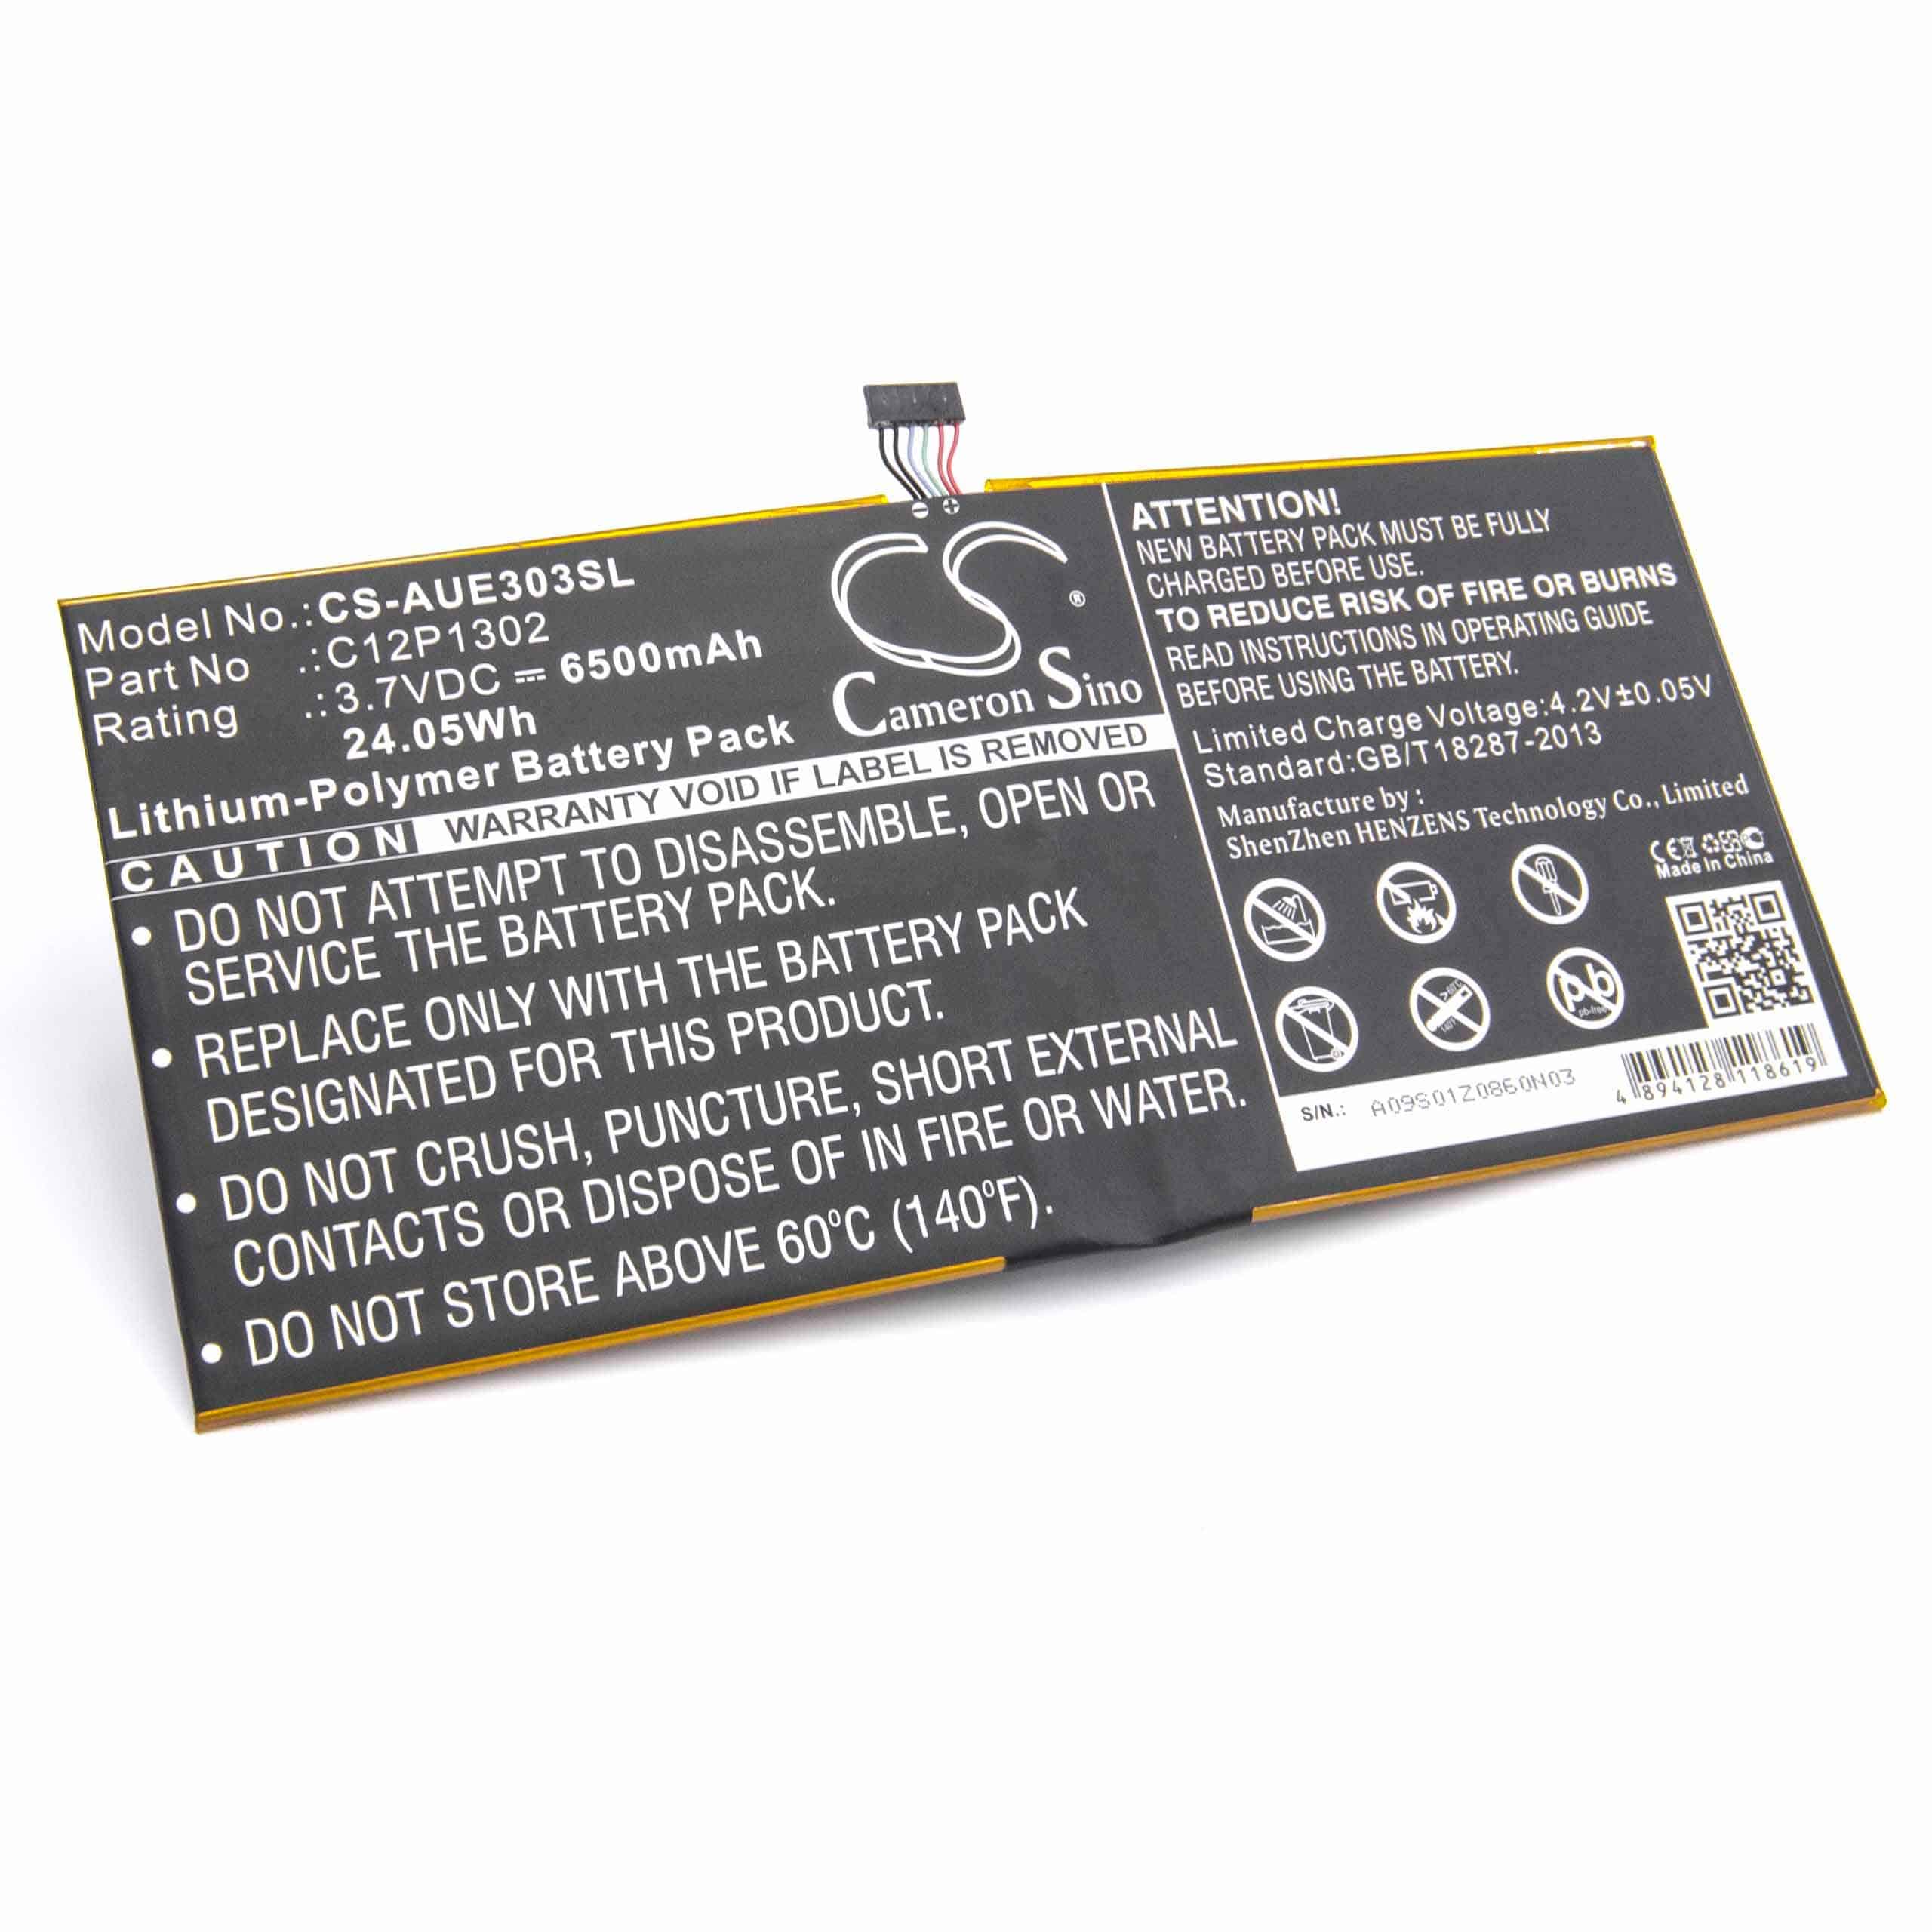 Notebook Battery Replacement for Asus C12P1302 - 6500mAh 3.7V Li-polymer, black